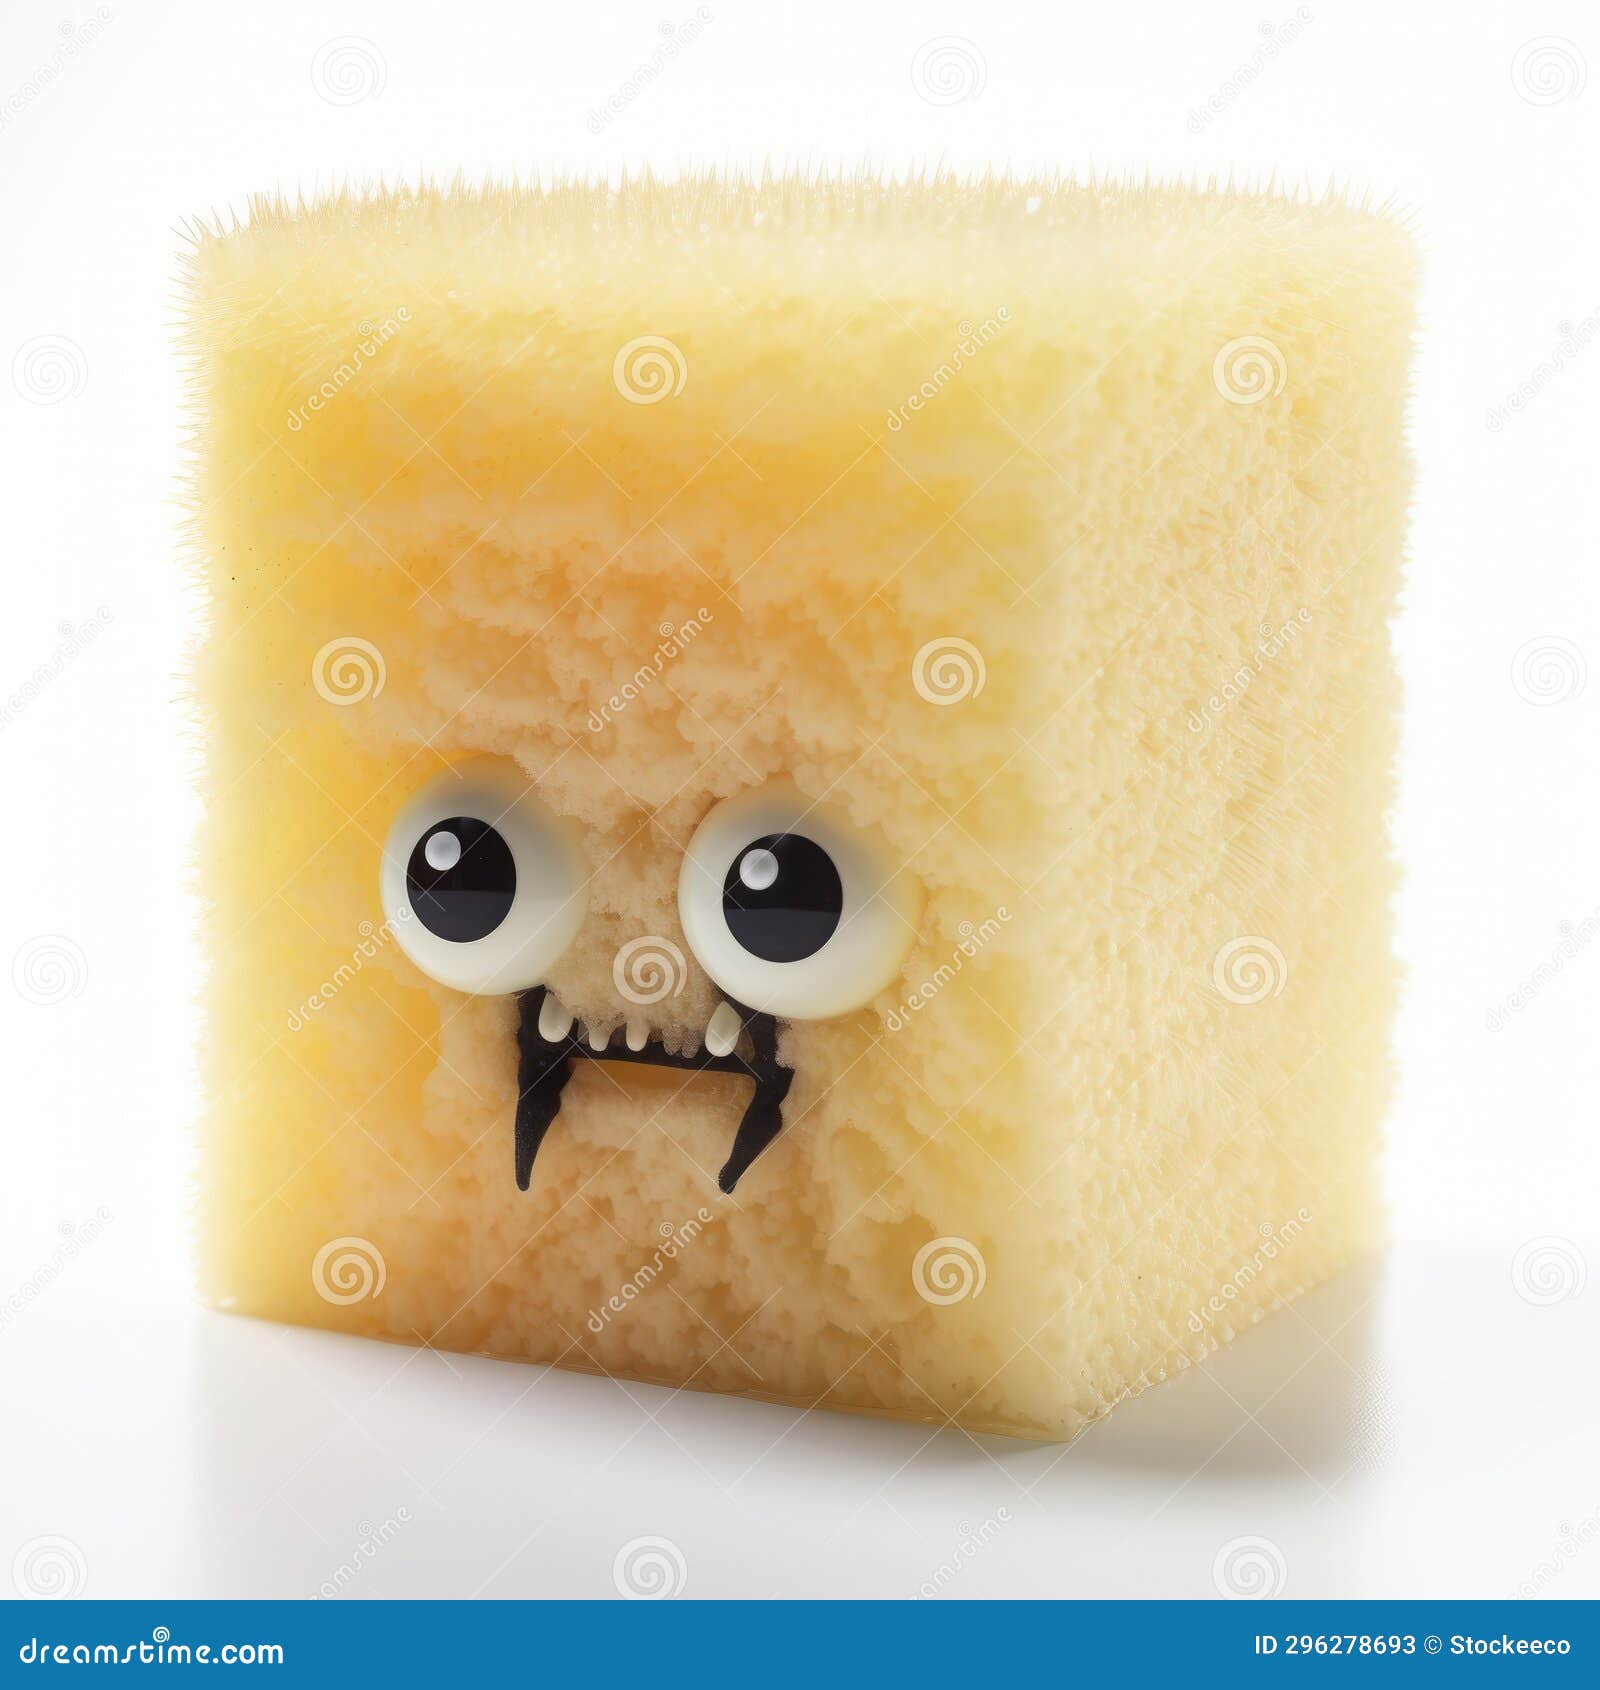 spongy cubo-futurism: a unique sponge cake with big eyes and teeth